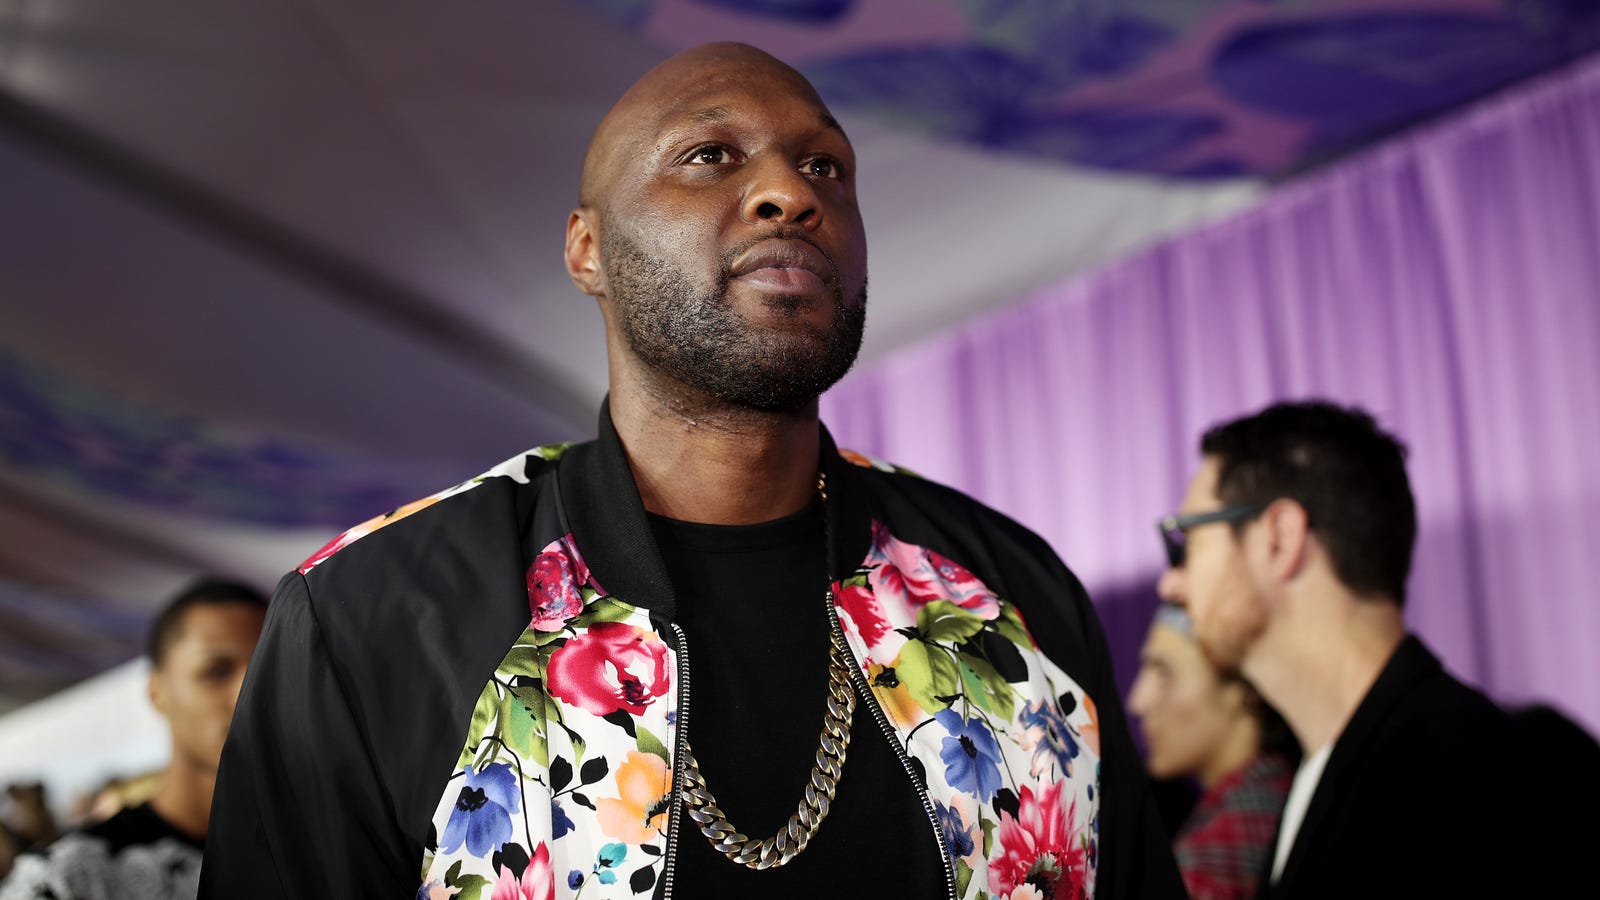 Lamar Odom Opens Up About Addiction and Joining the Big 3 League